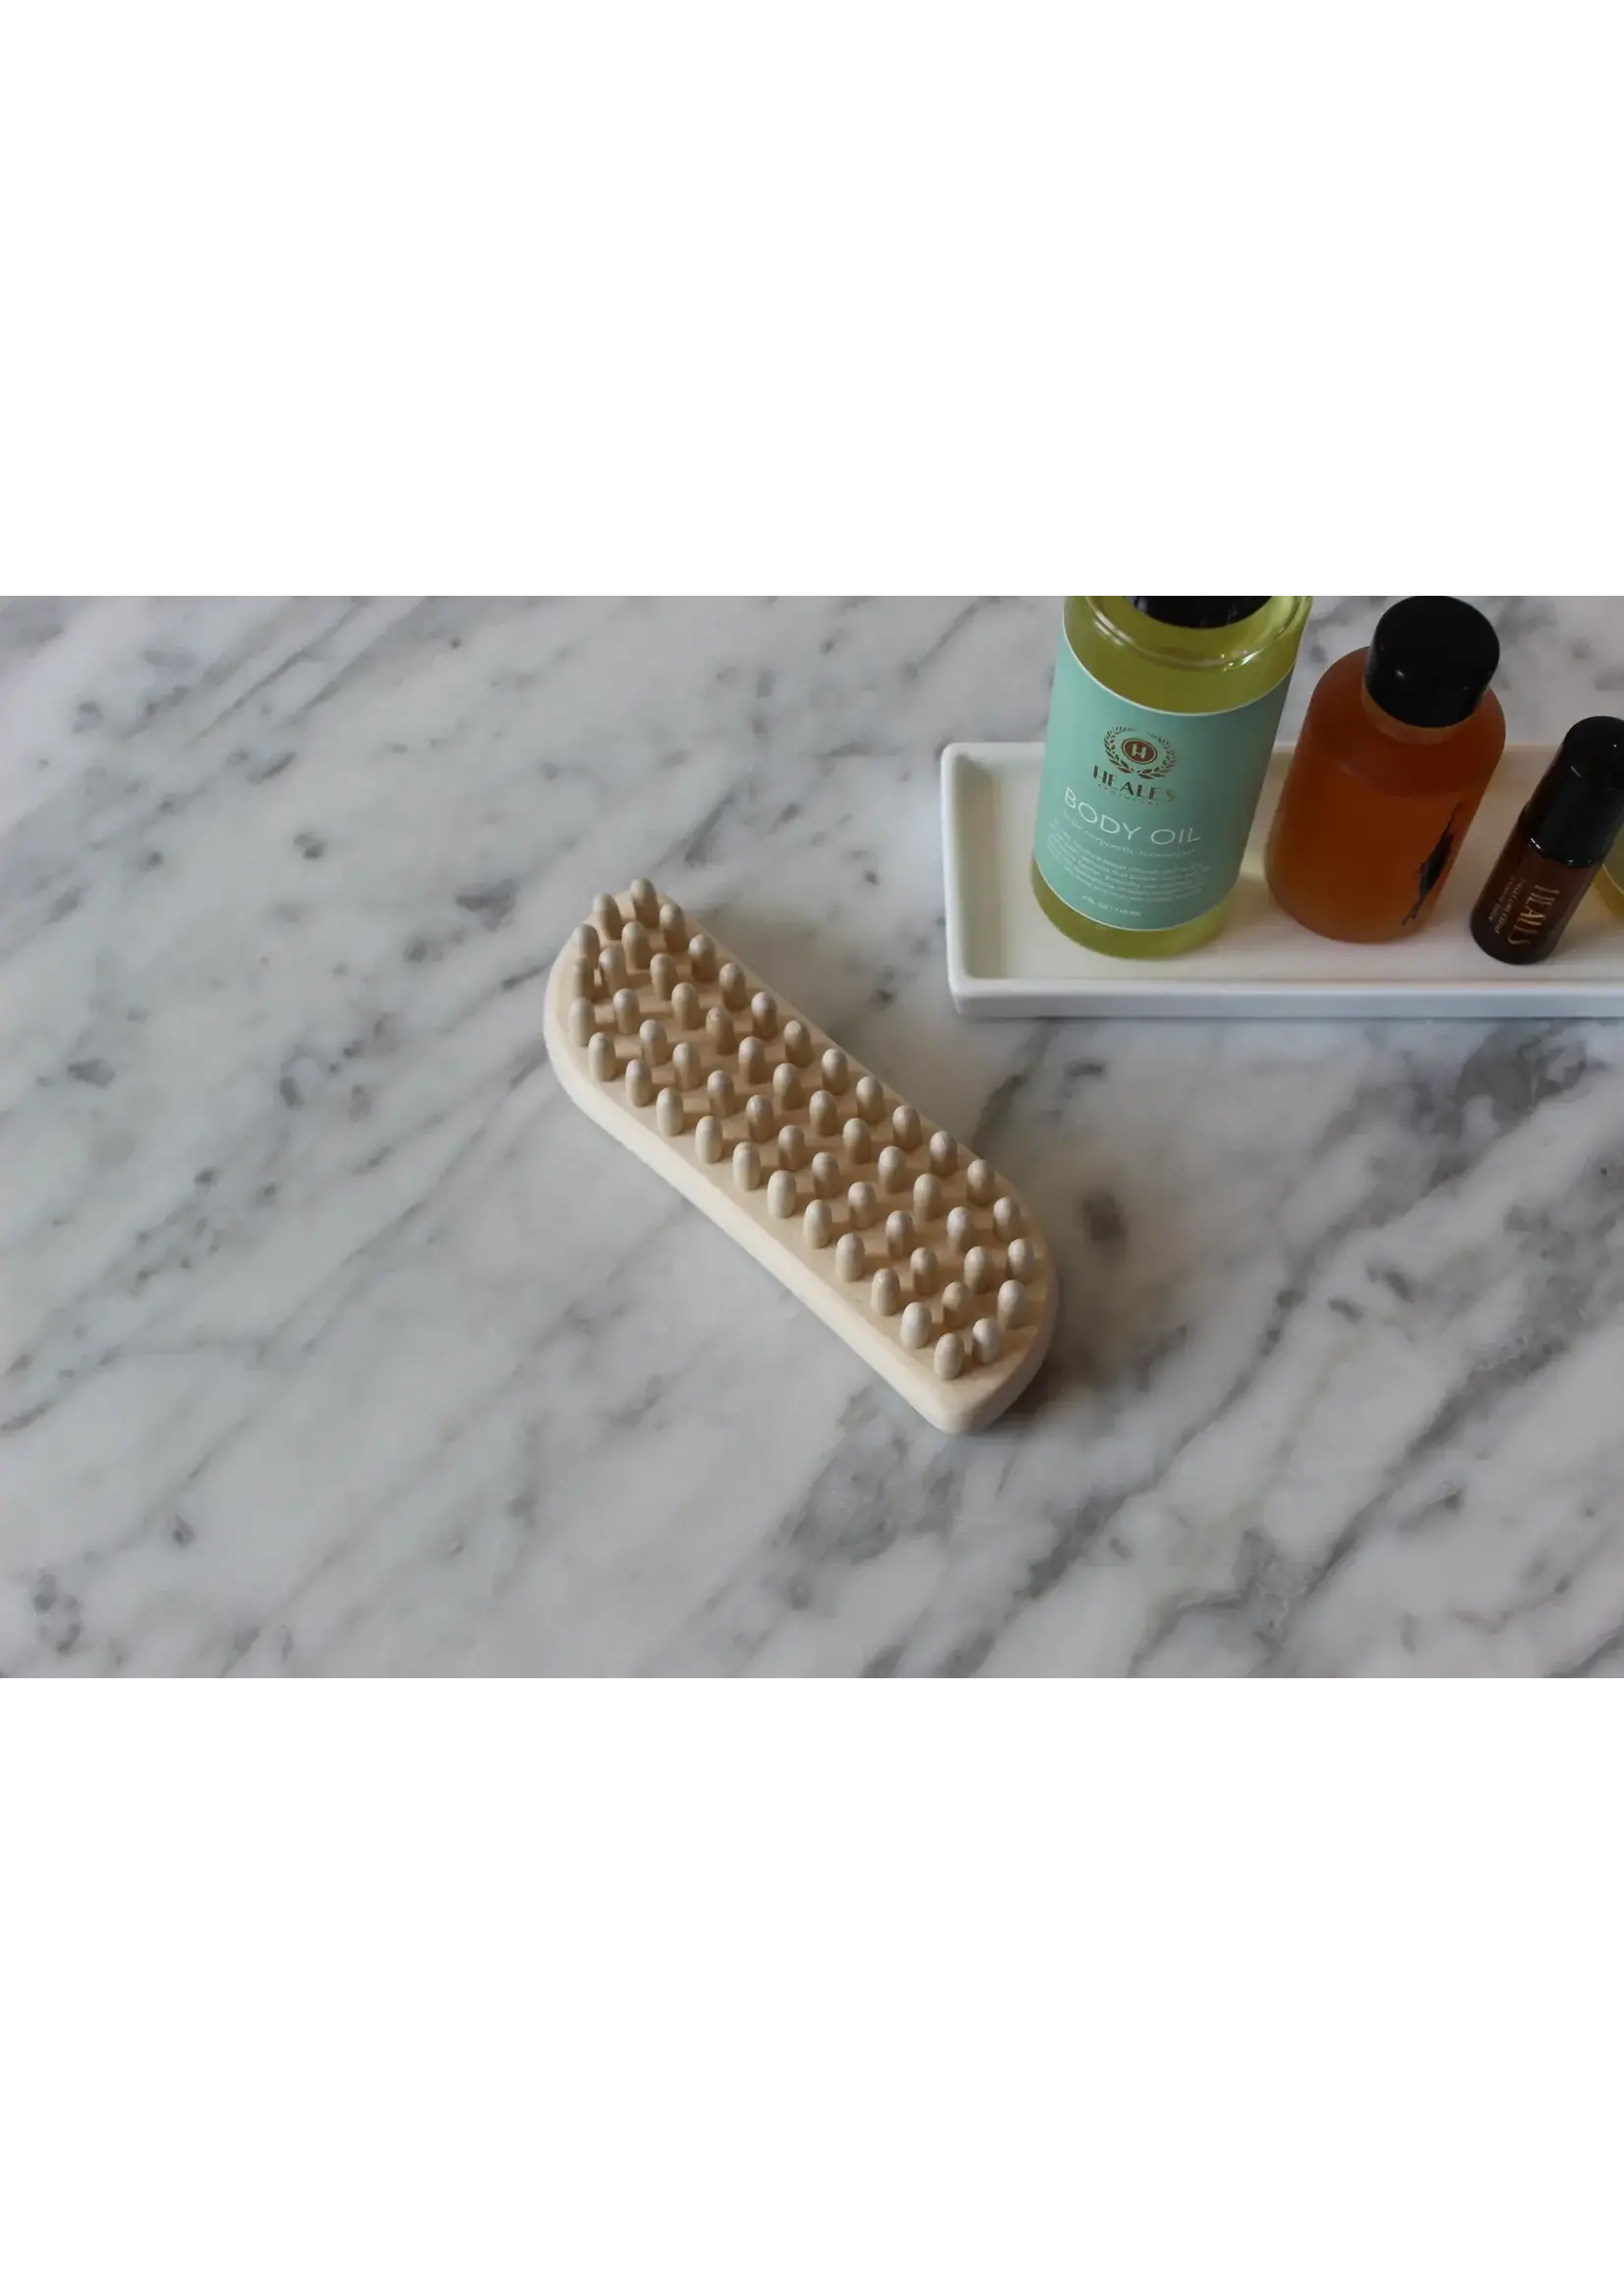 Murchison-Hume Heales Apothecary Fascia Brush